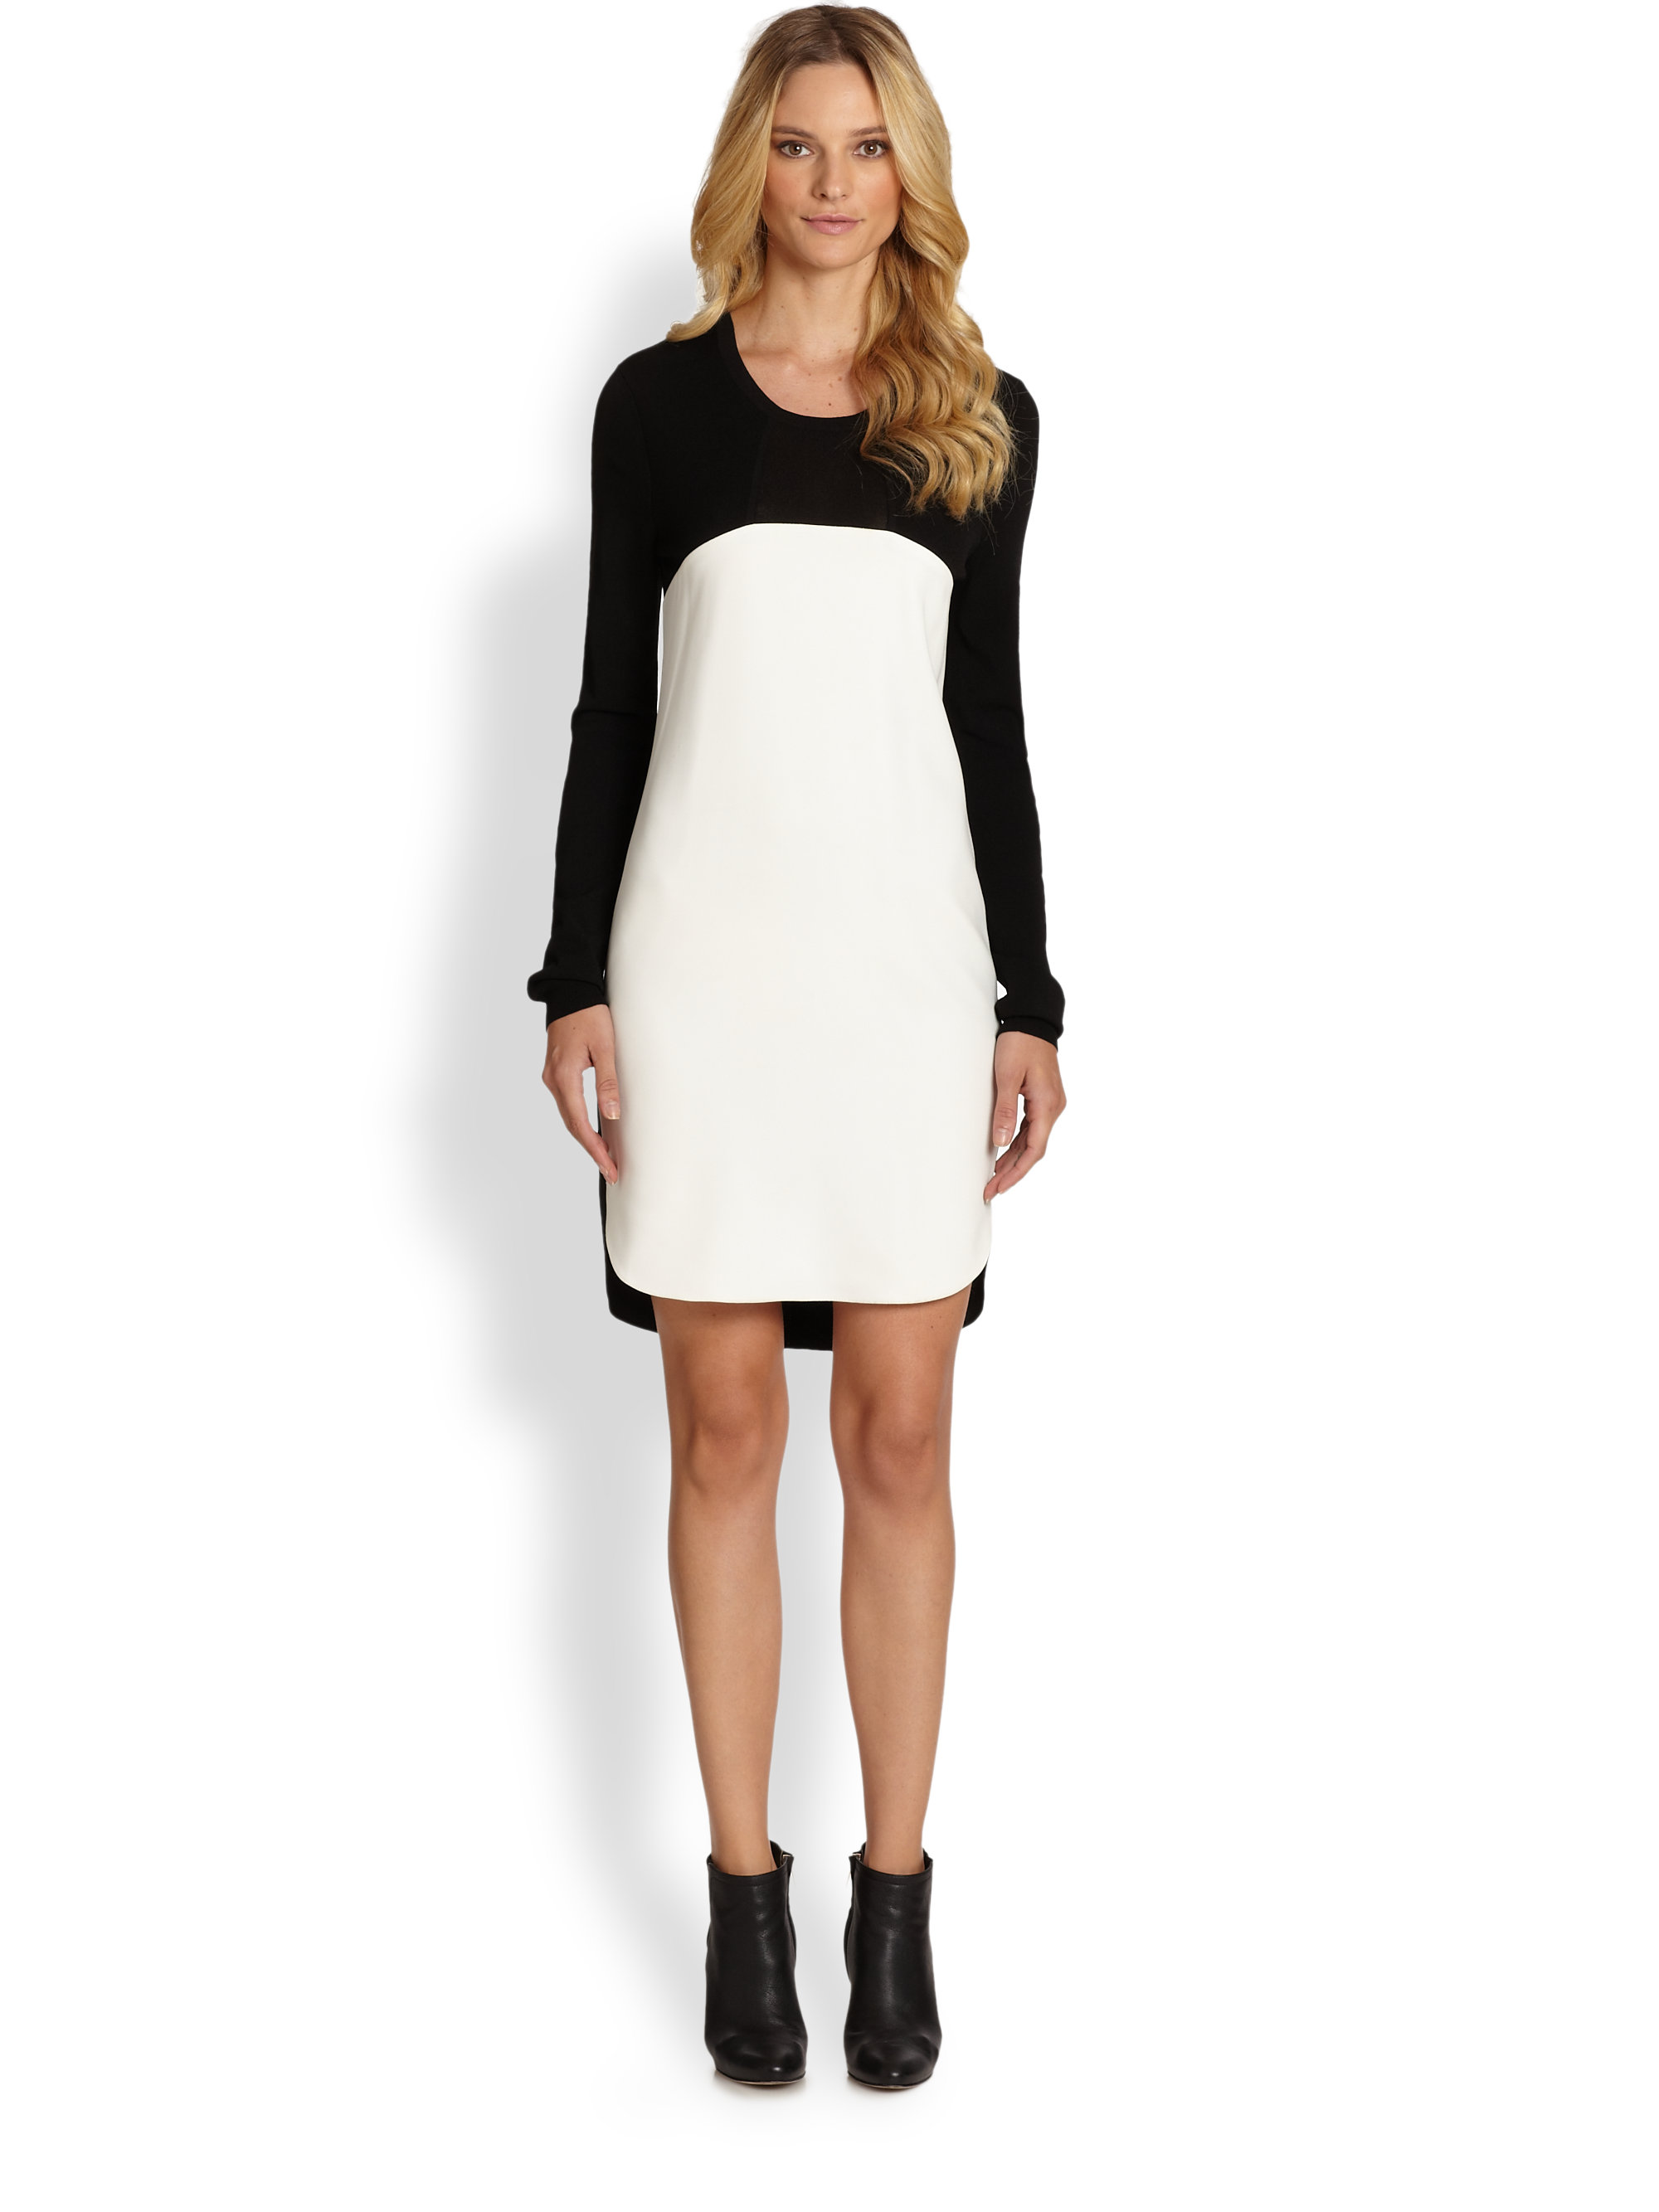 Lyst - Dkny Long Sleeve Color Block Dress in White